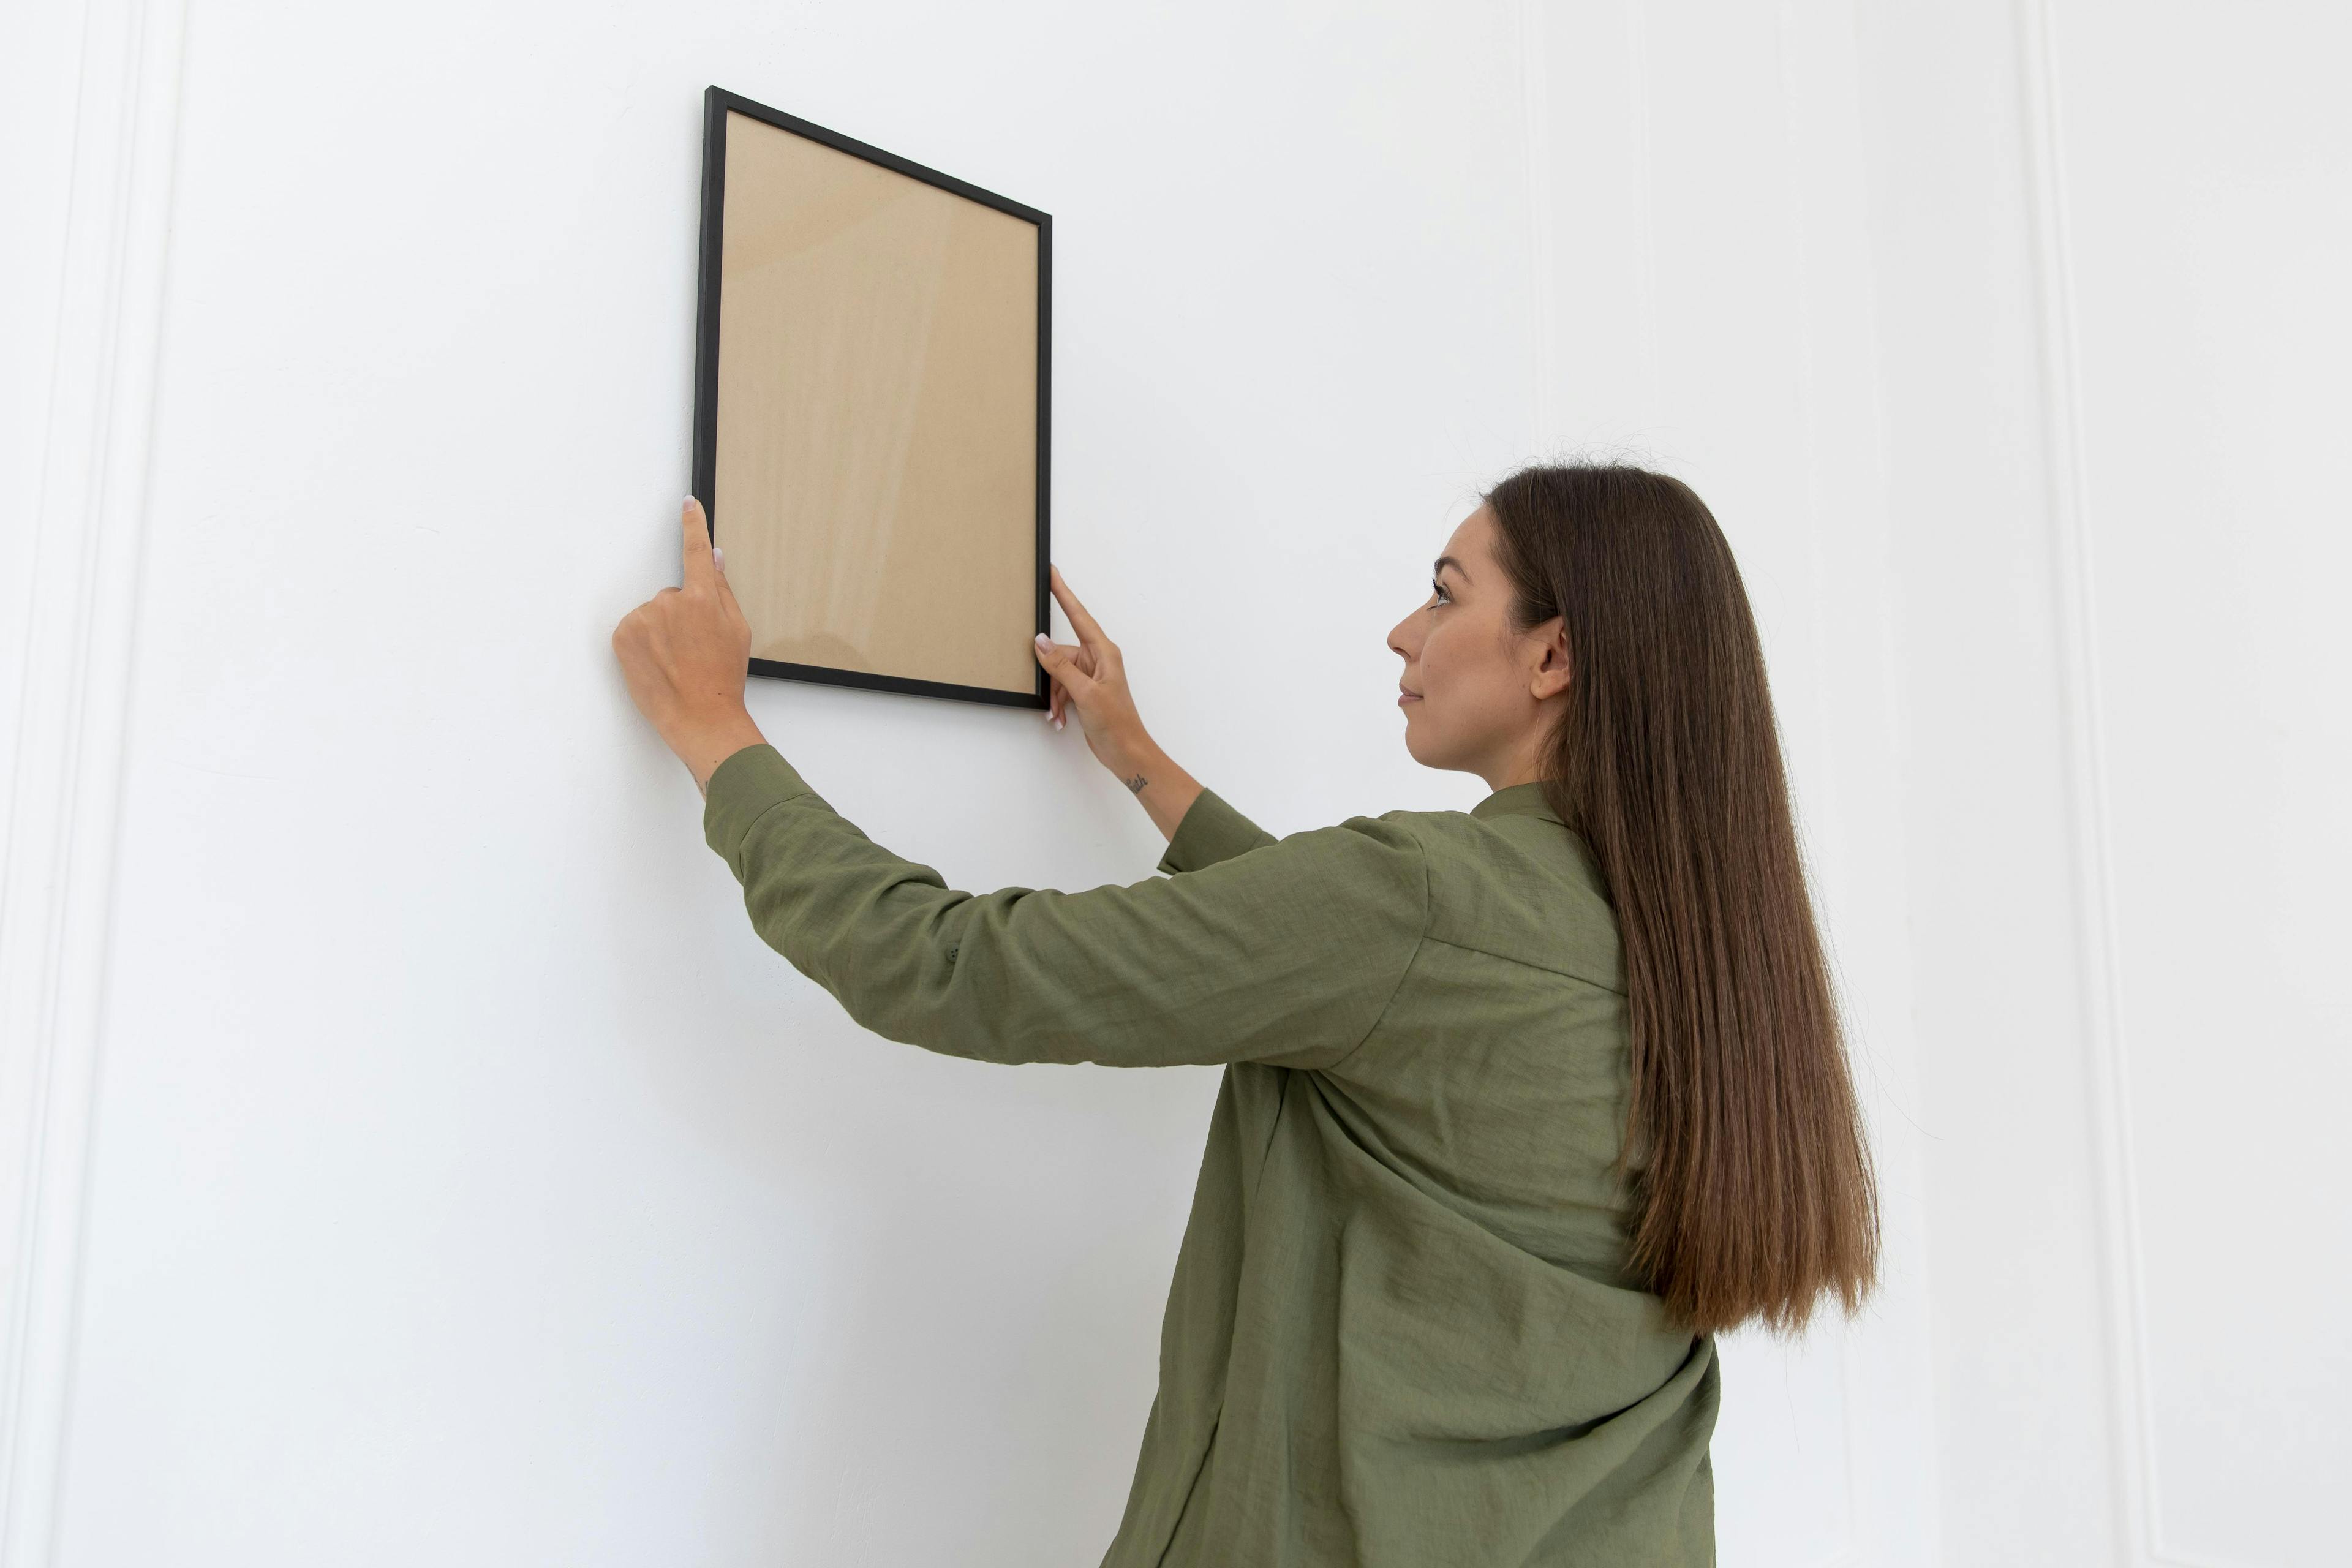 How to put up a poster without damaging it: 7 ways to keep your walls safe